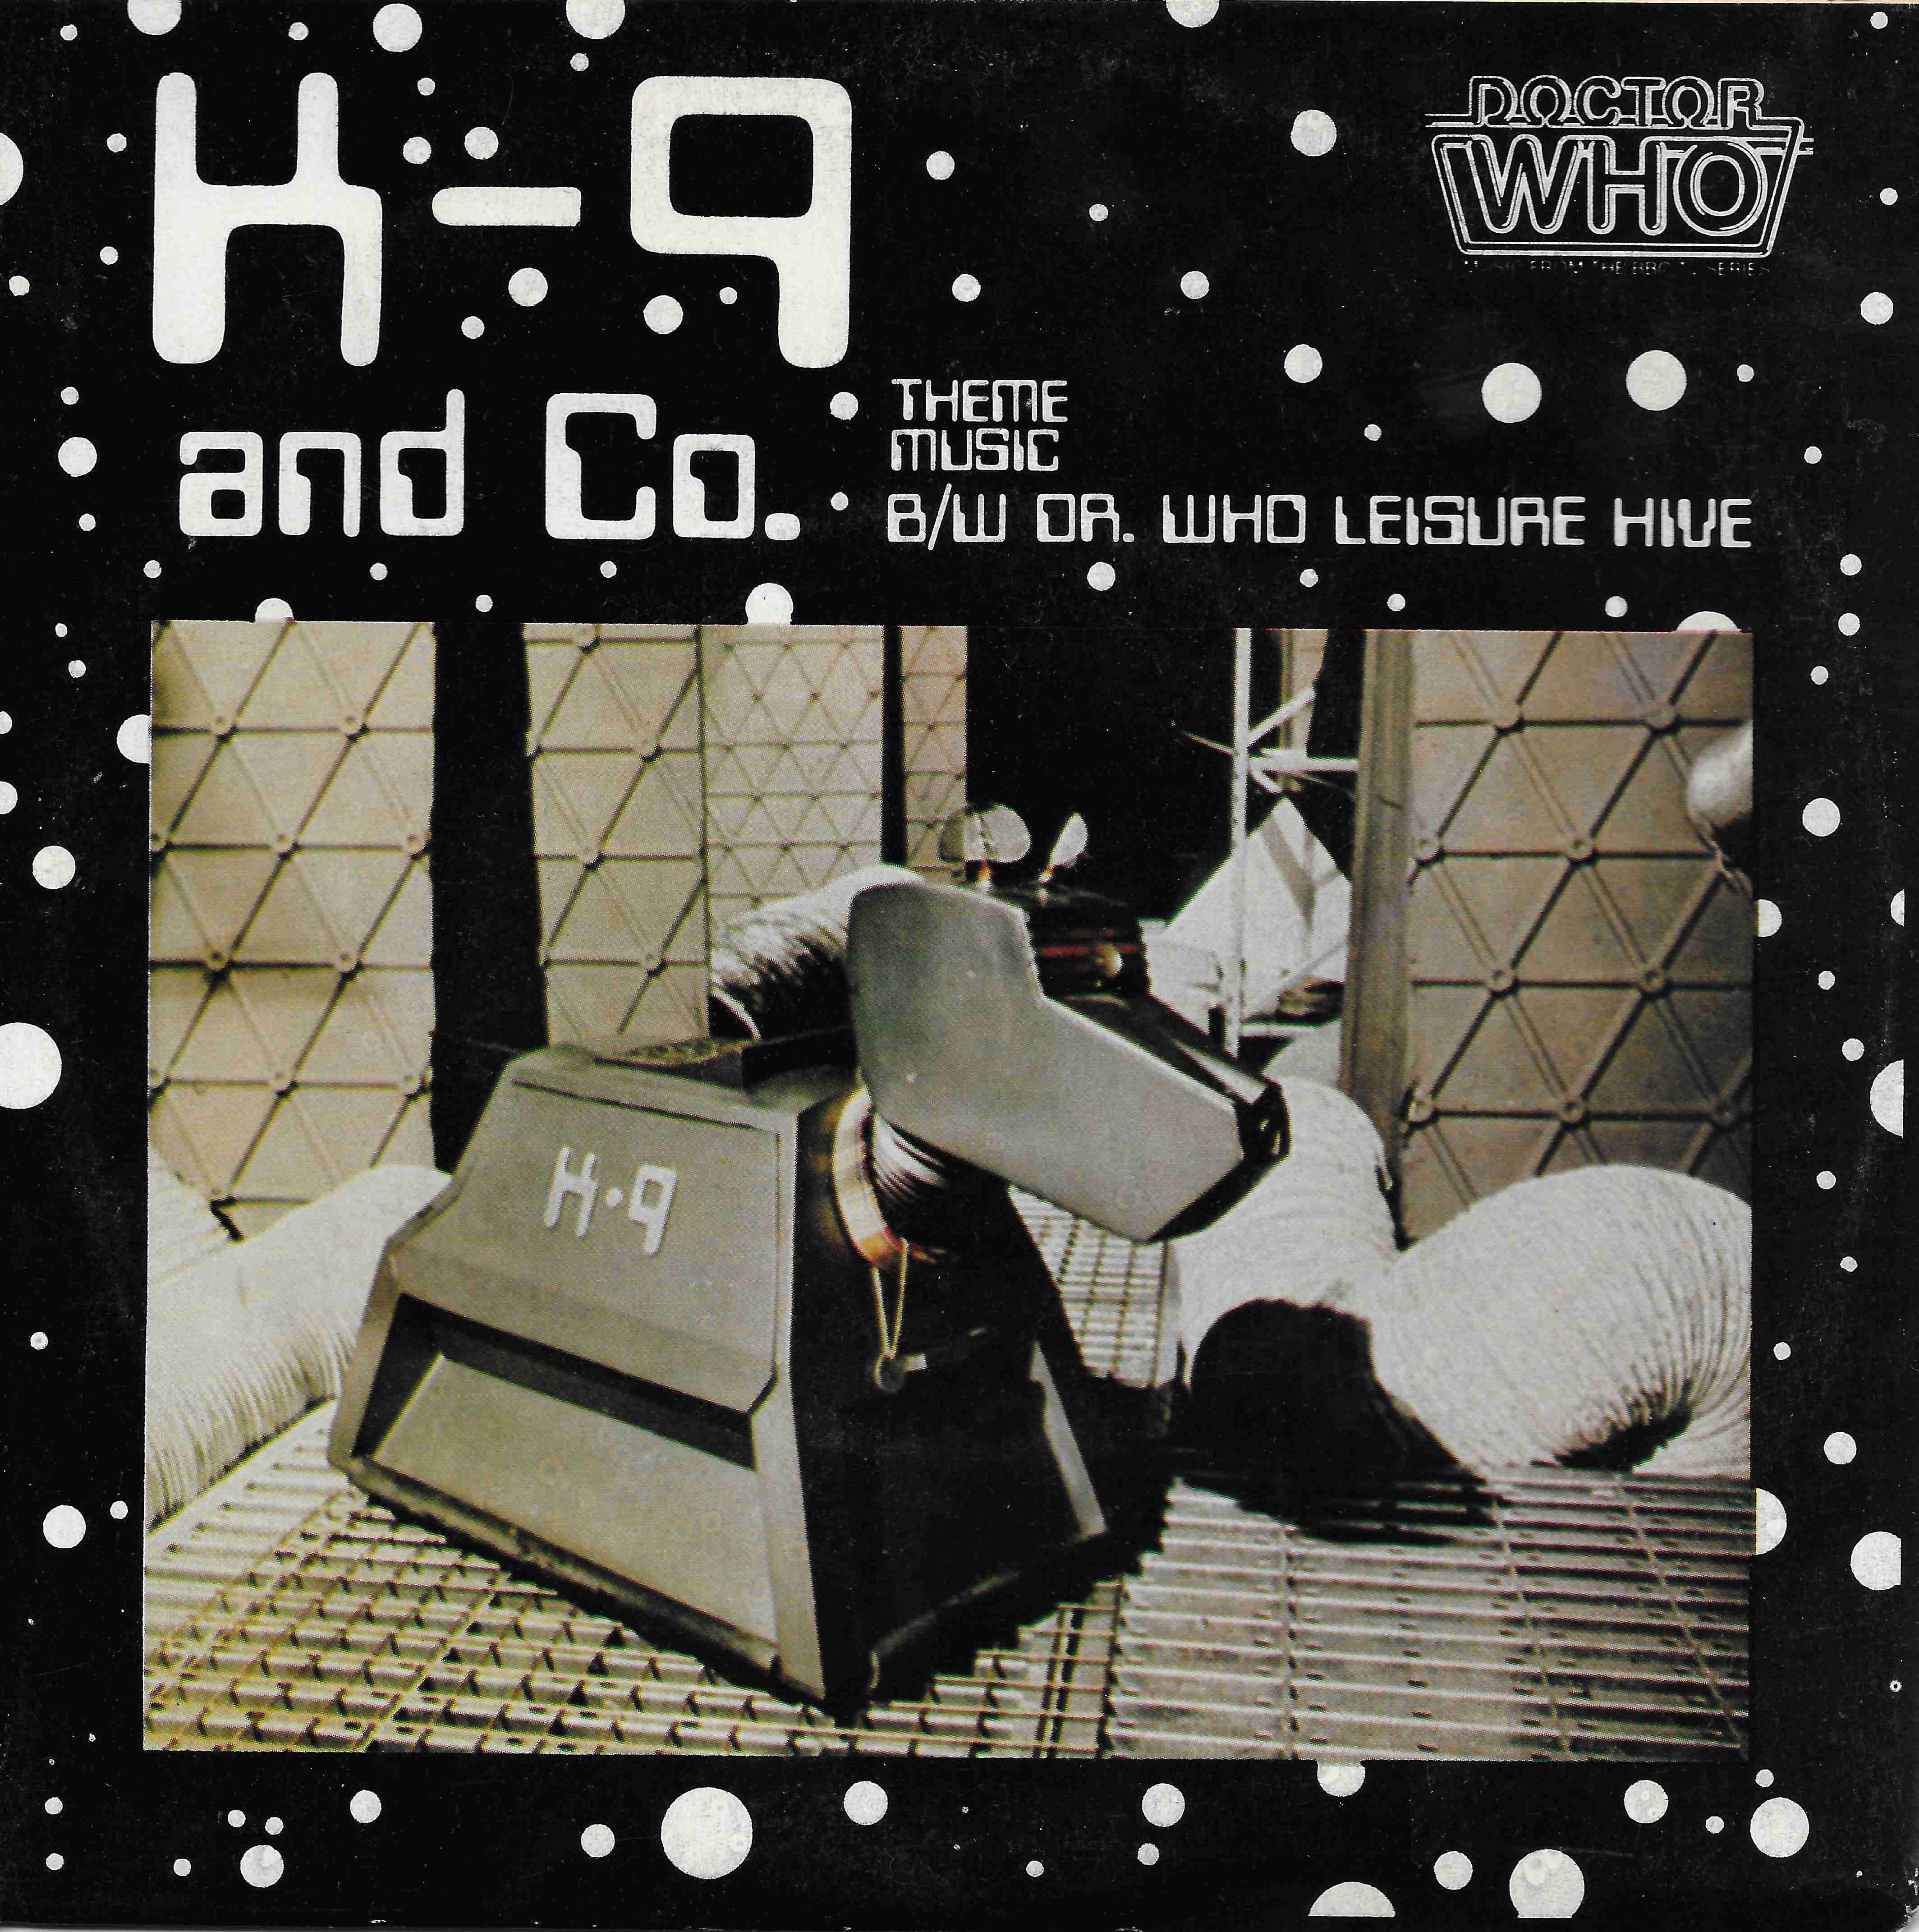 Picture of K-9 and Co. by artist Flachra Trench / Ian Levine from the BBC singles - Records and Tapes library